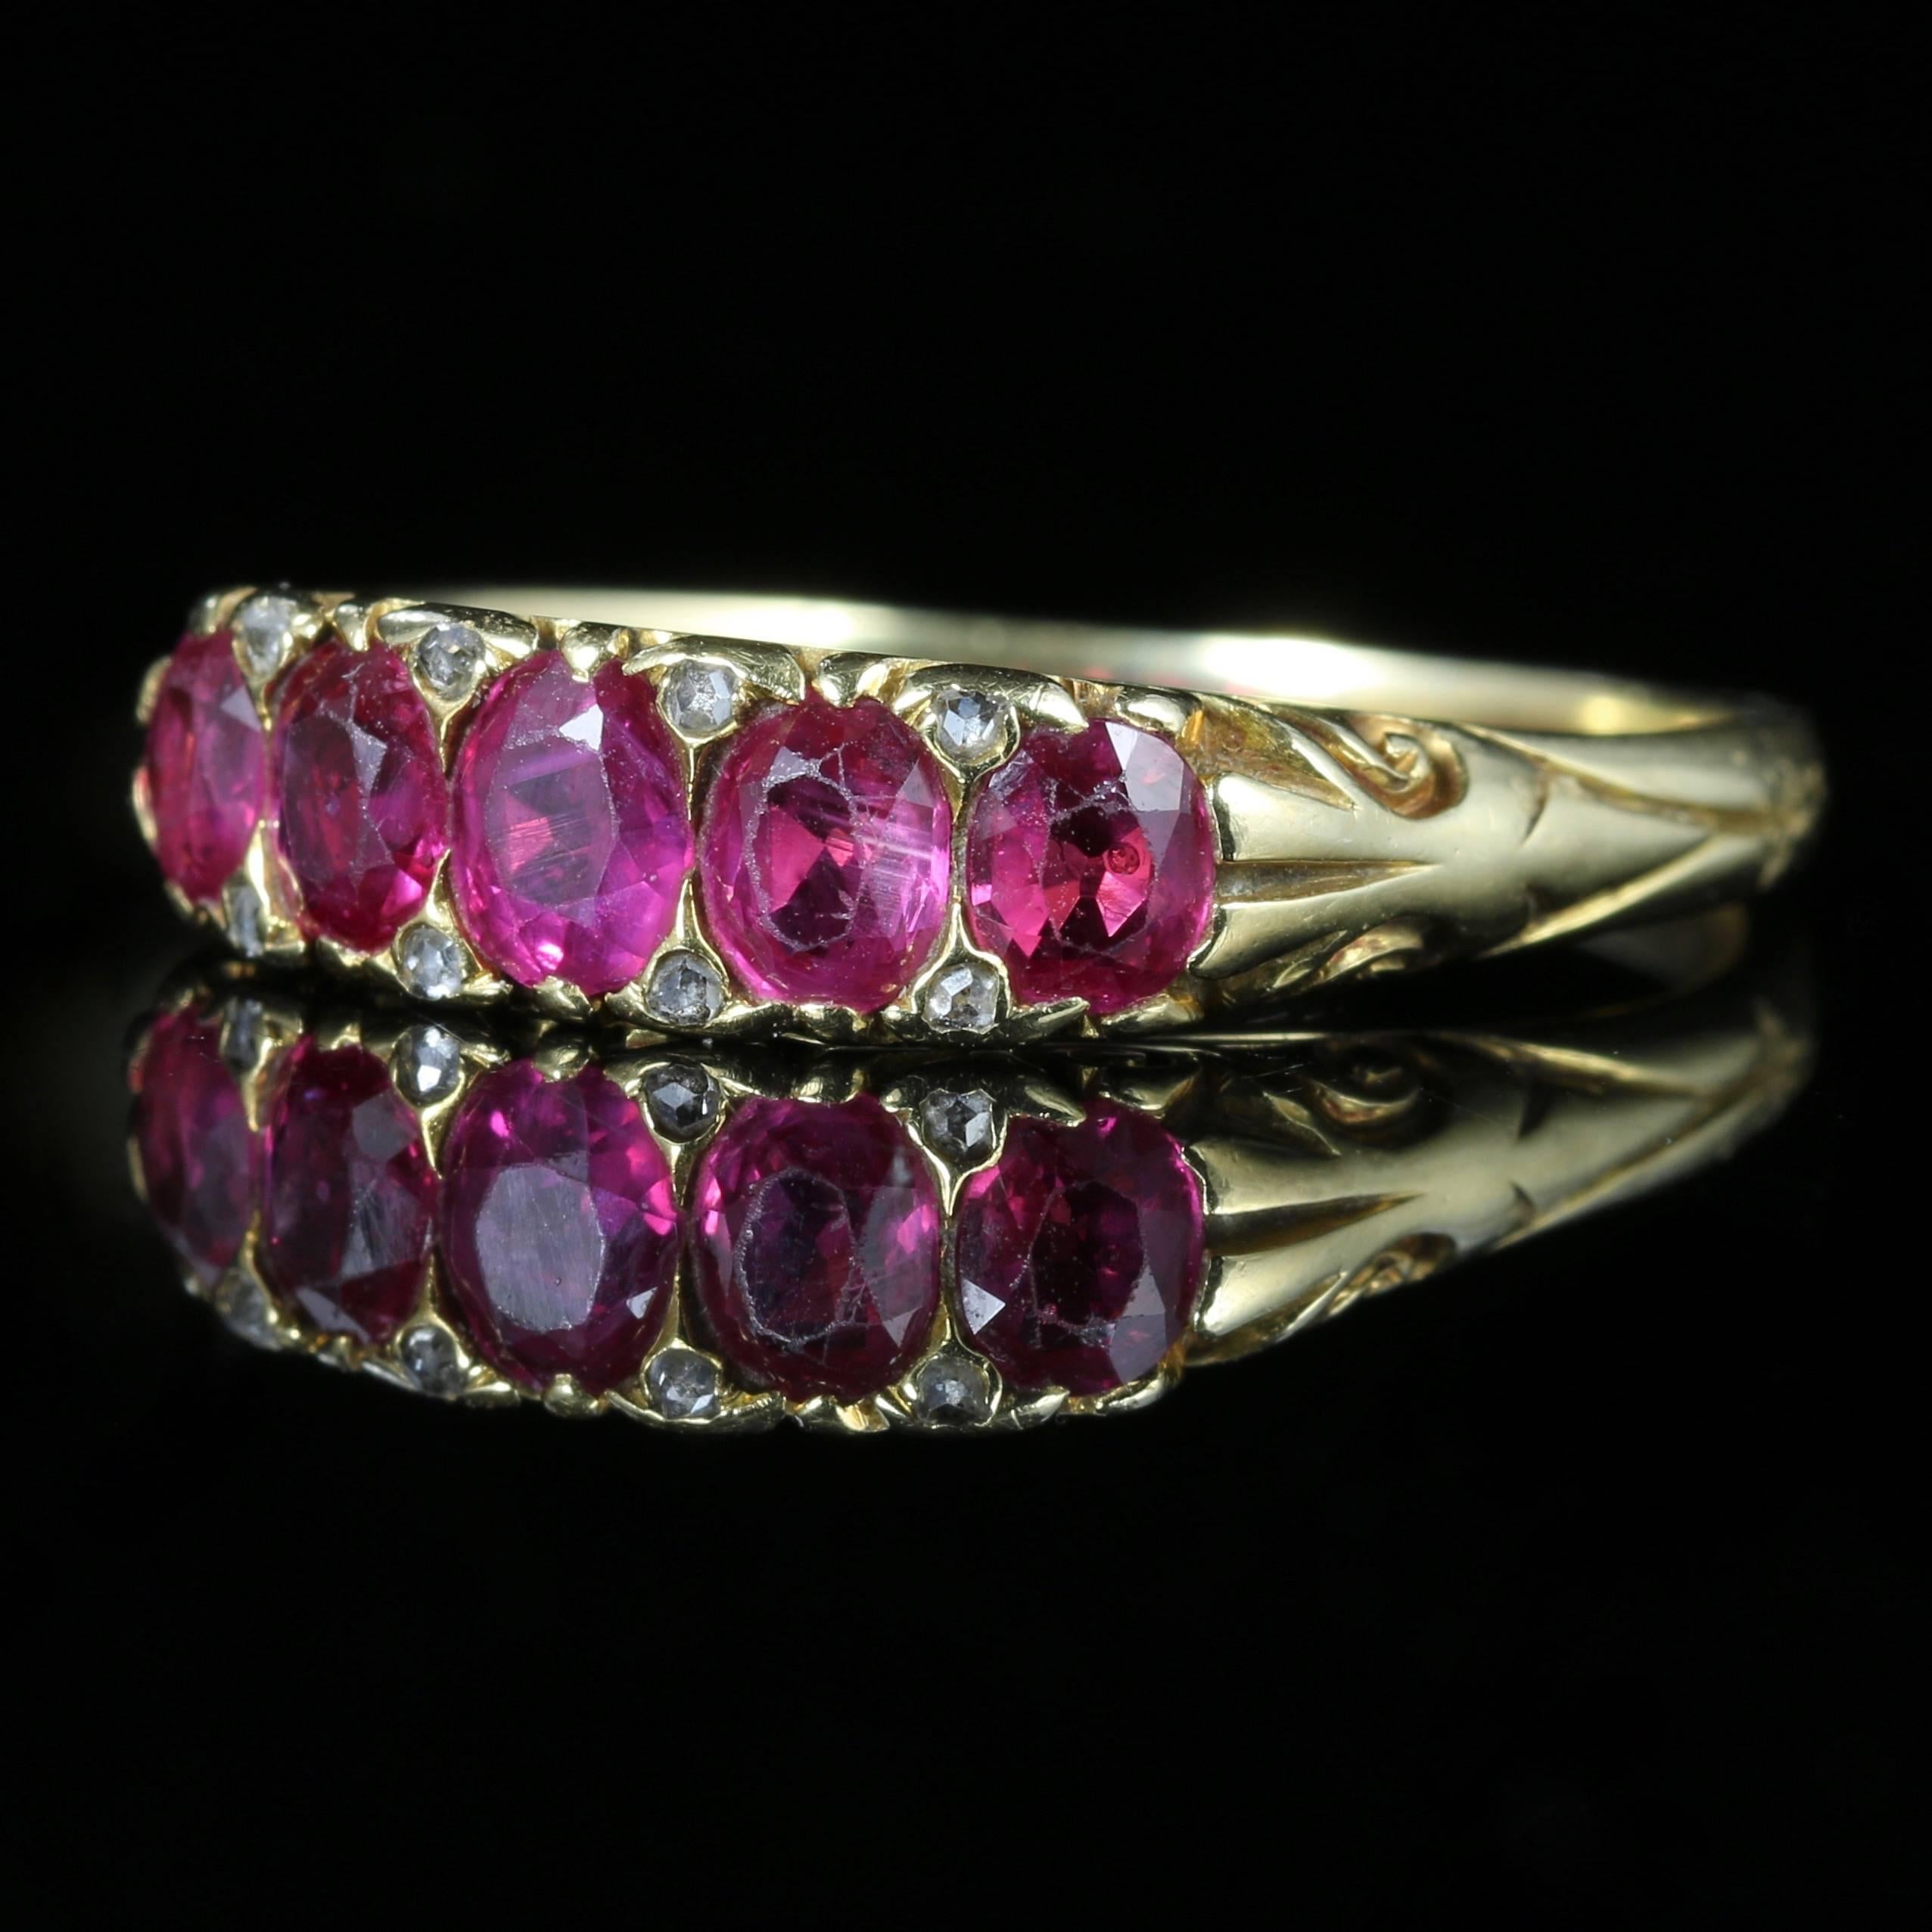 This beautiful Victorian ring is set with the most fabulous Burmese natural Rubies

Five beautiful rich pink Rubies are set across the central gallery with Diamonds nestled in between.

This ring has been certified and has been appraised as natural